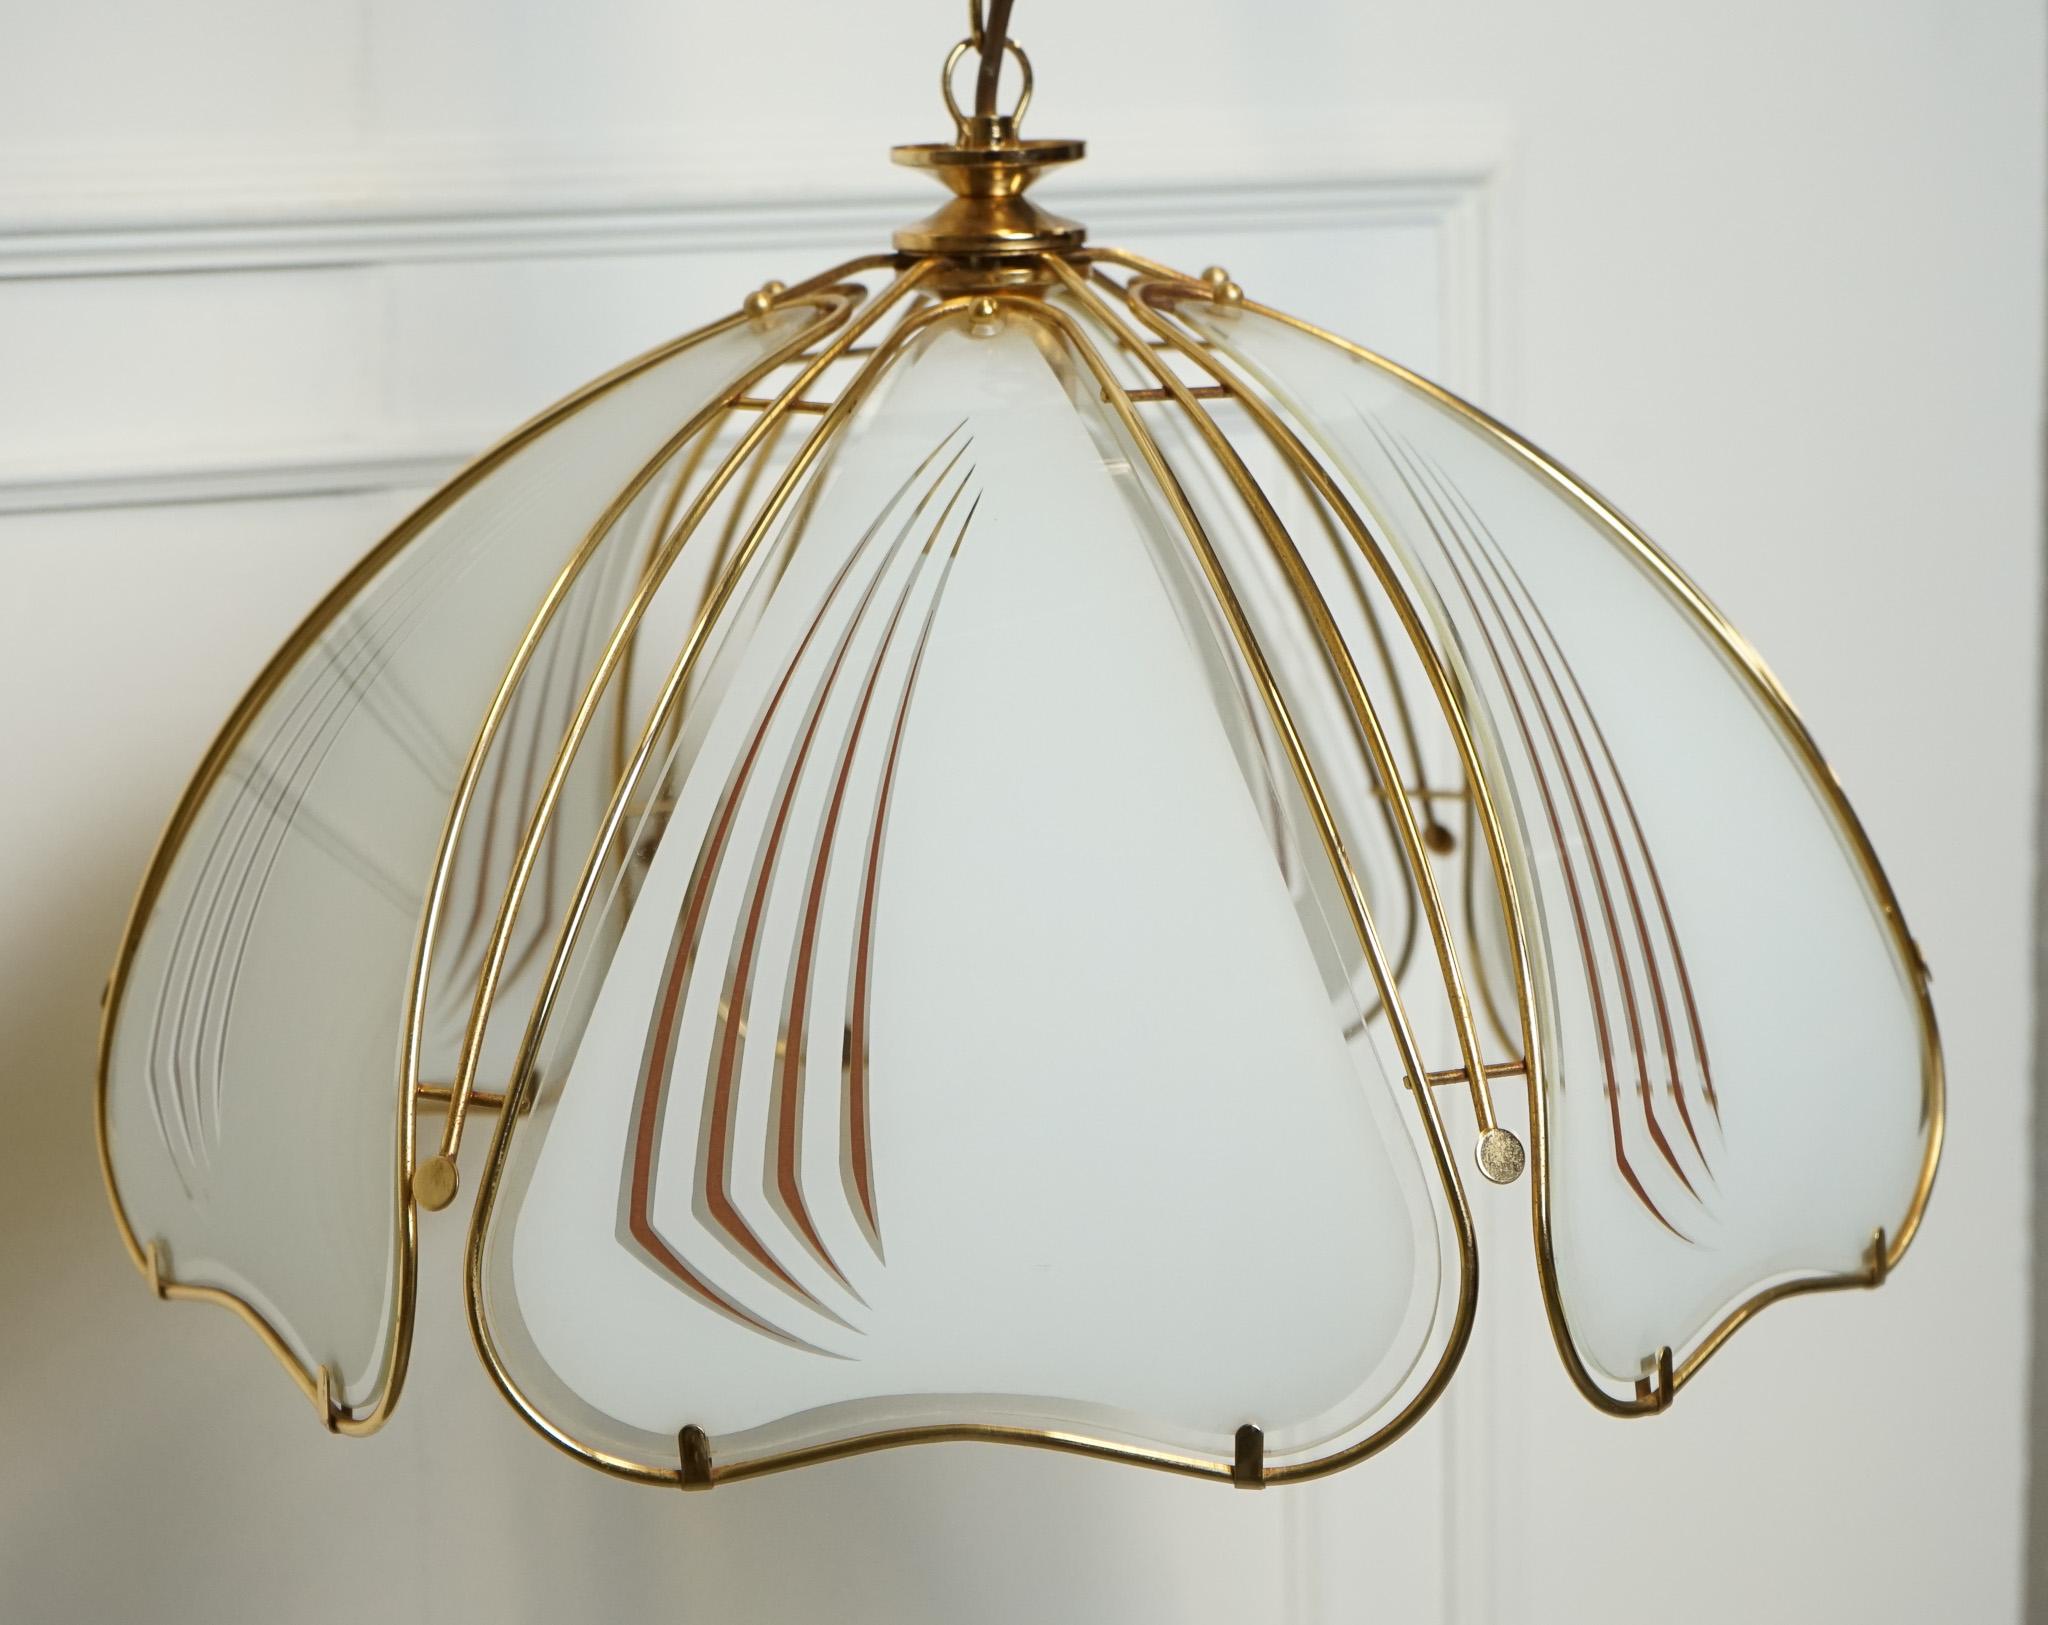 
We are delighted to offer for sale this Art Deco Style Italian Glass Chandelier.

An Art Deco style Italian chandelier features a striking design with glass elements that give it a luxurious and elegant aesthetic. 

The chandelier is adorned with